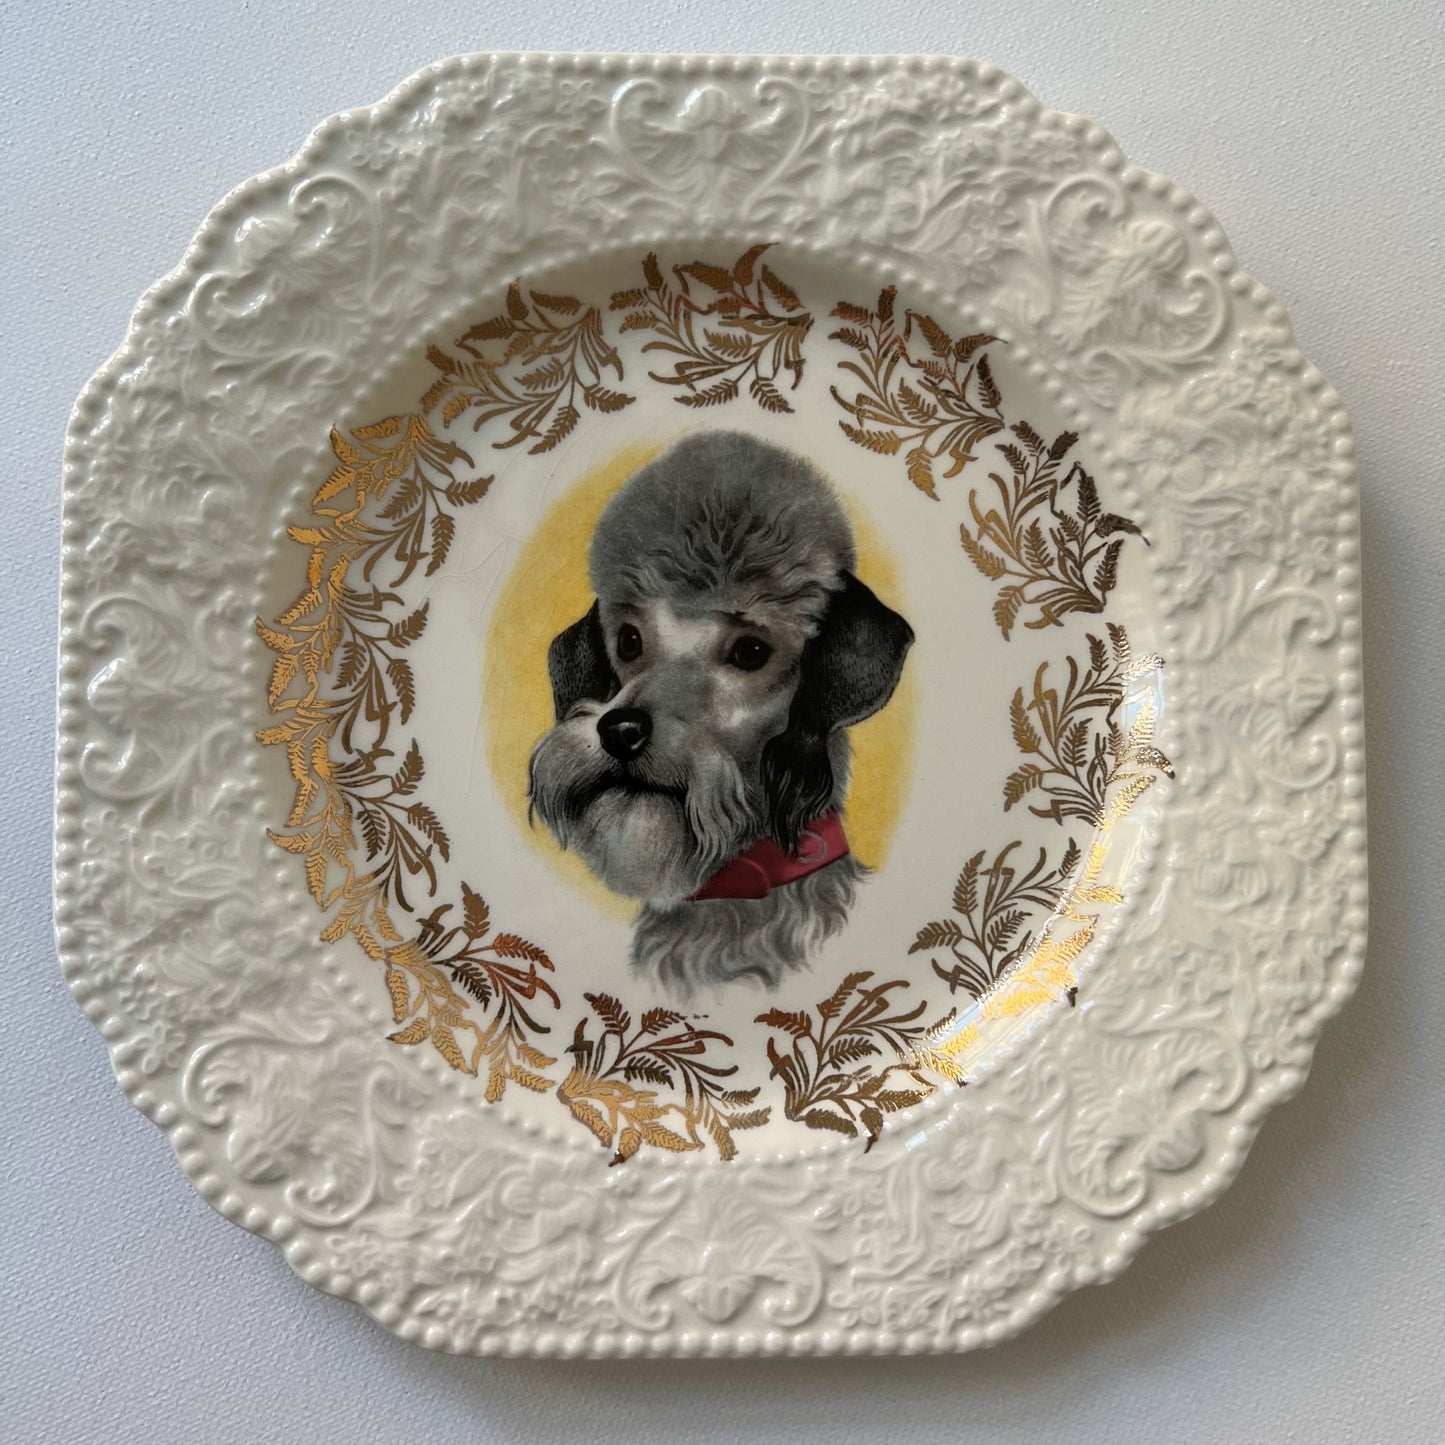 【Vintage】England ‐ Lord Nelson Pottery 1950s～ Poodle Dog Motif Dish